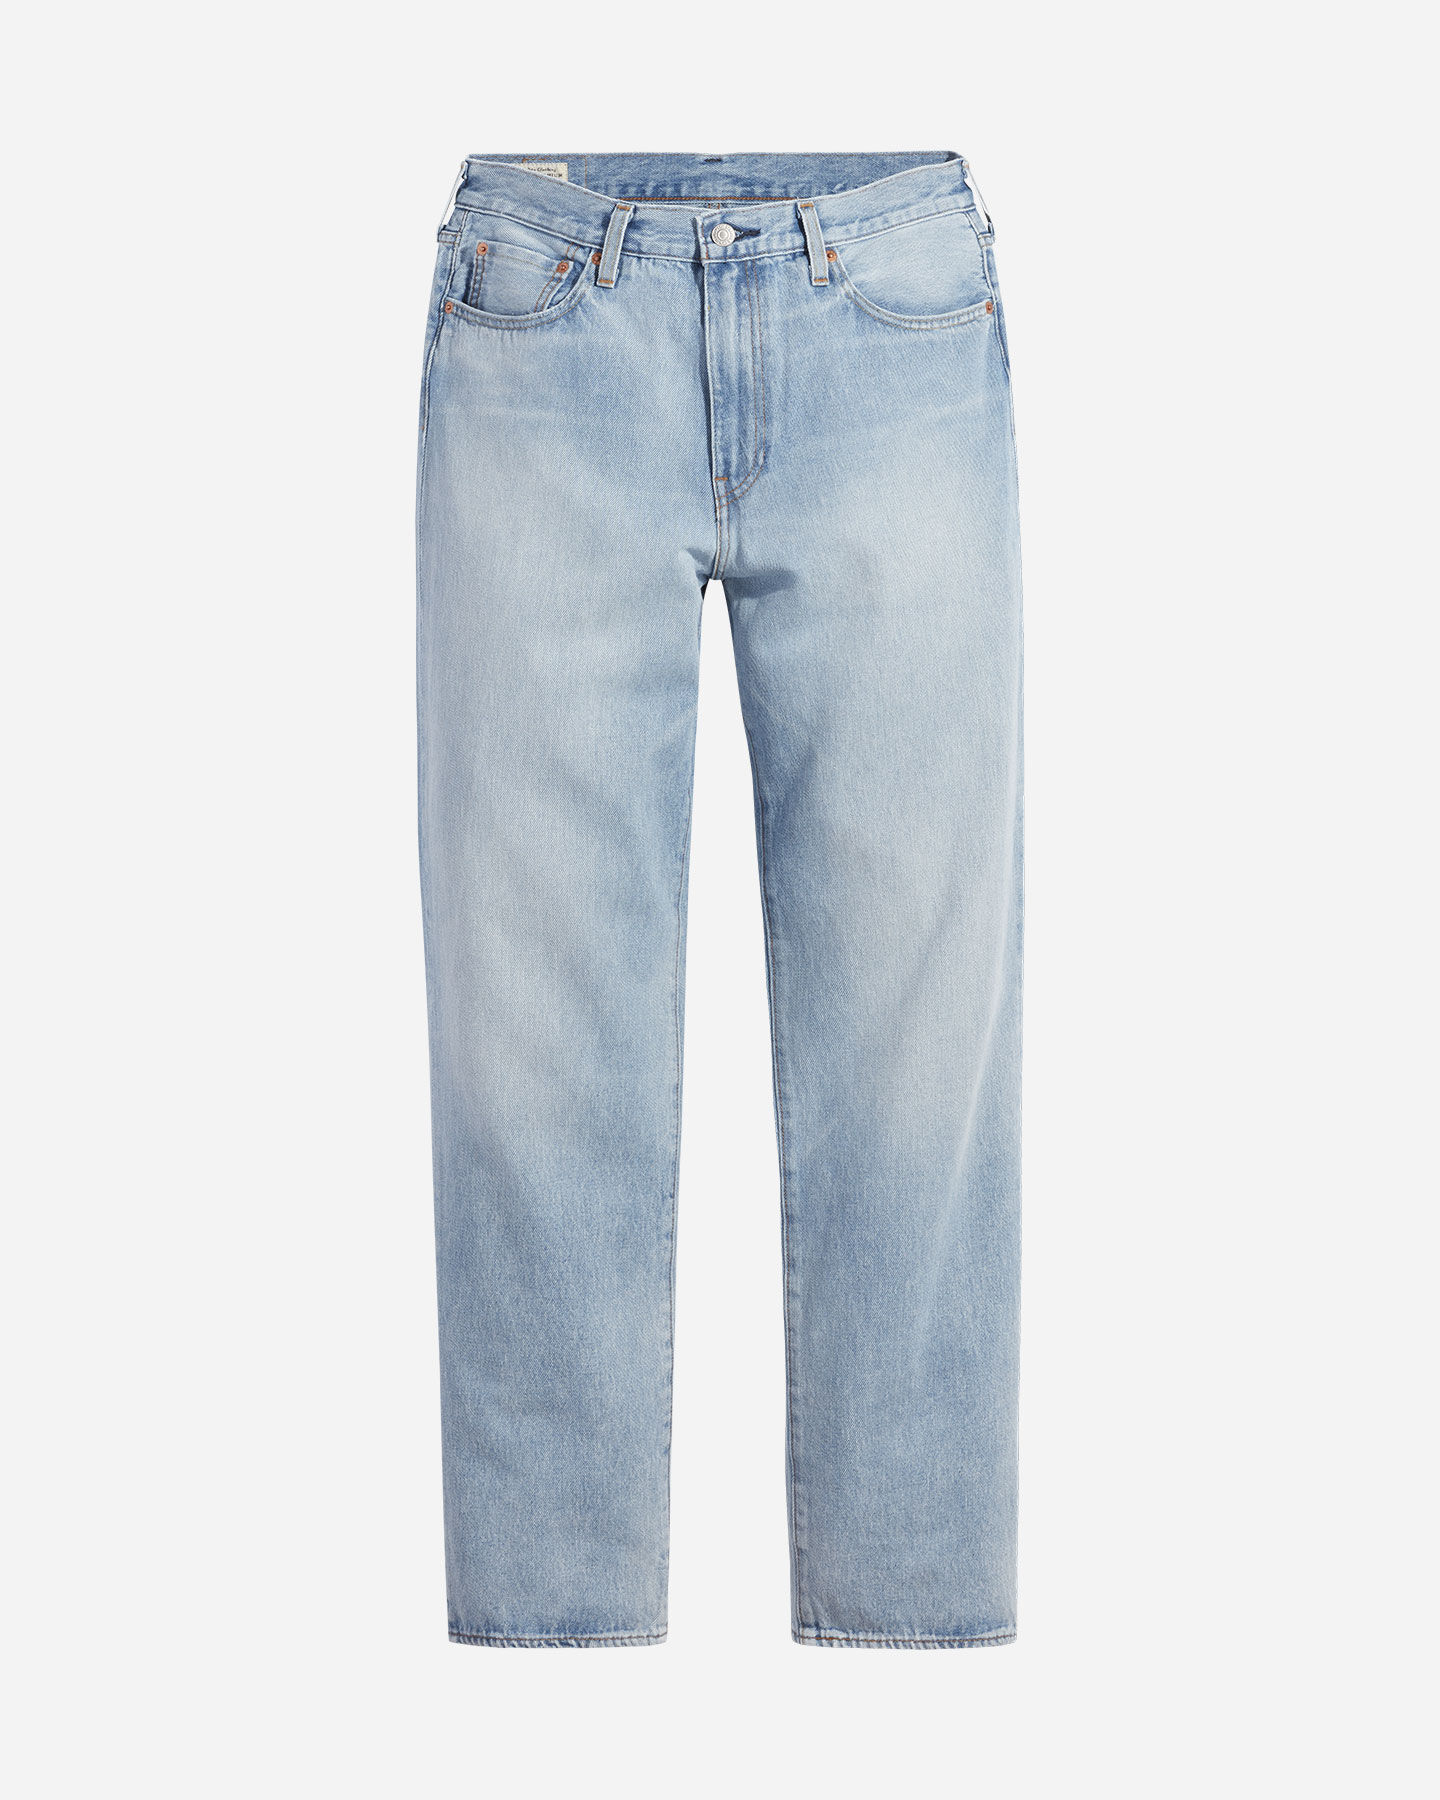  Jeans LEVI'S STAY LOOSE M S4103070|0027|29 scatto 5